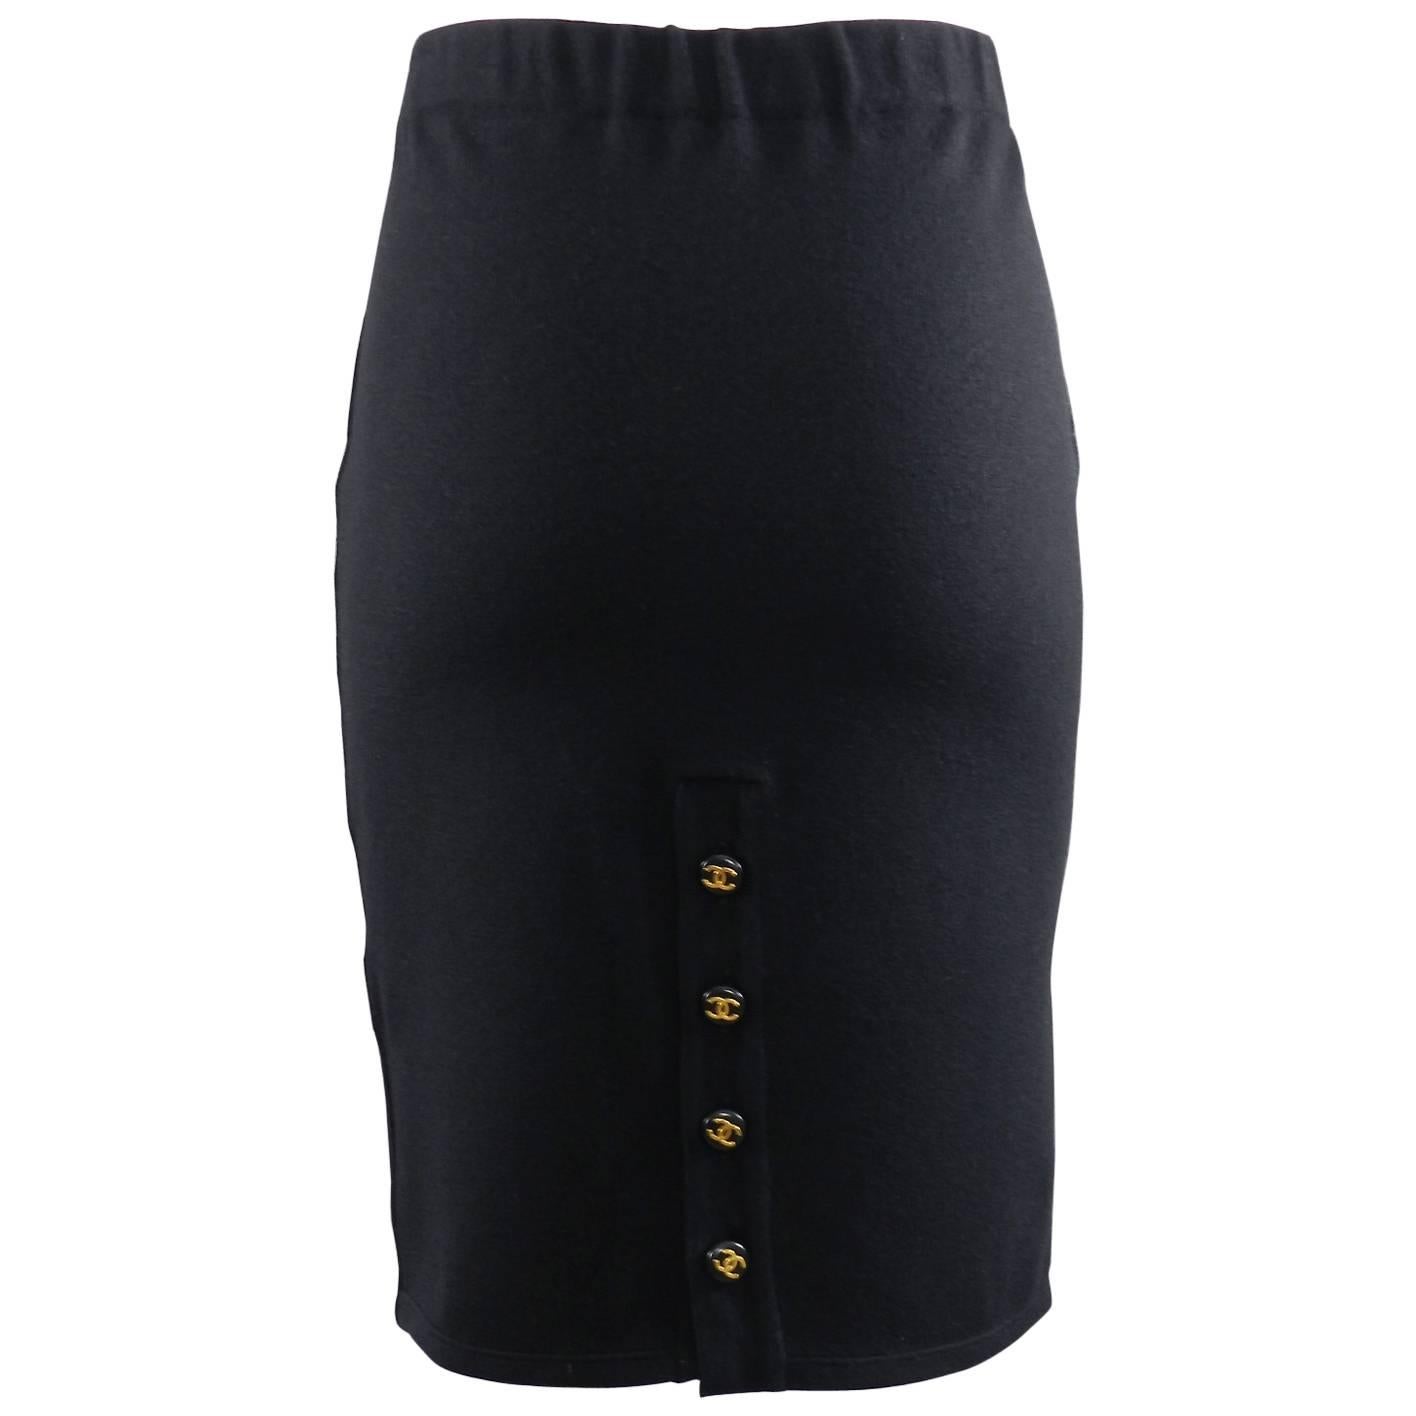 Chanel black knit jersey tube skirt with CC buttons